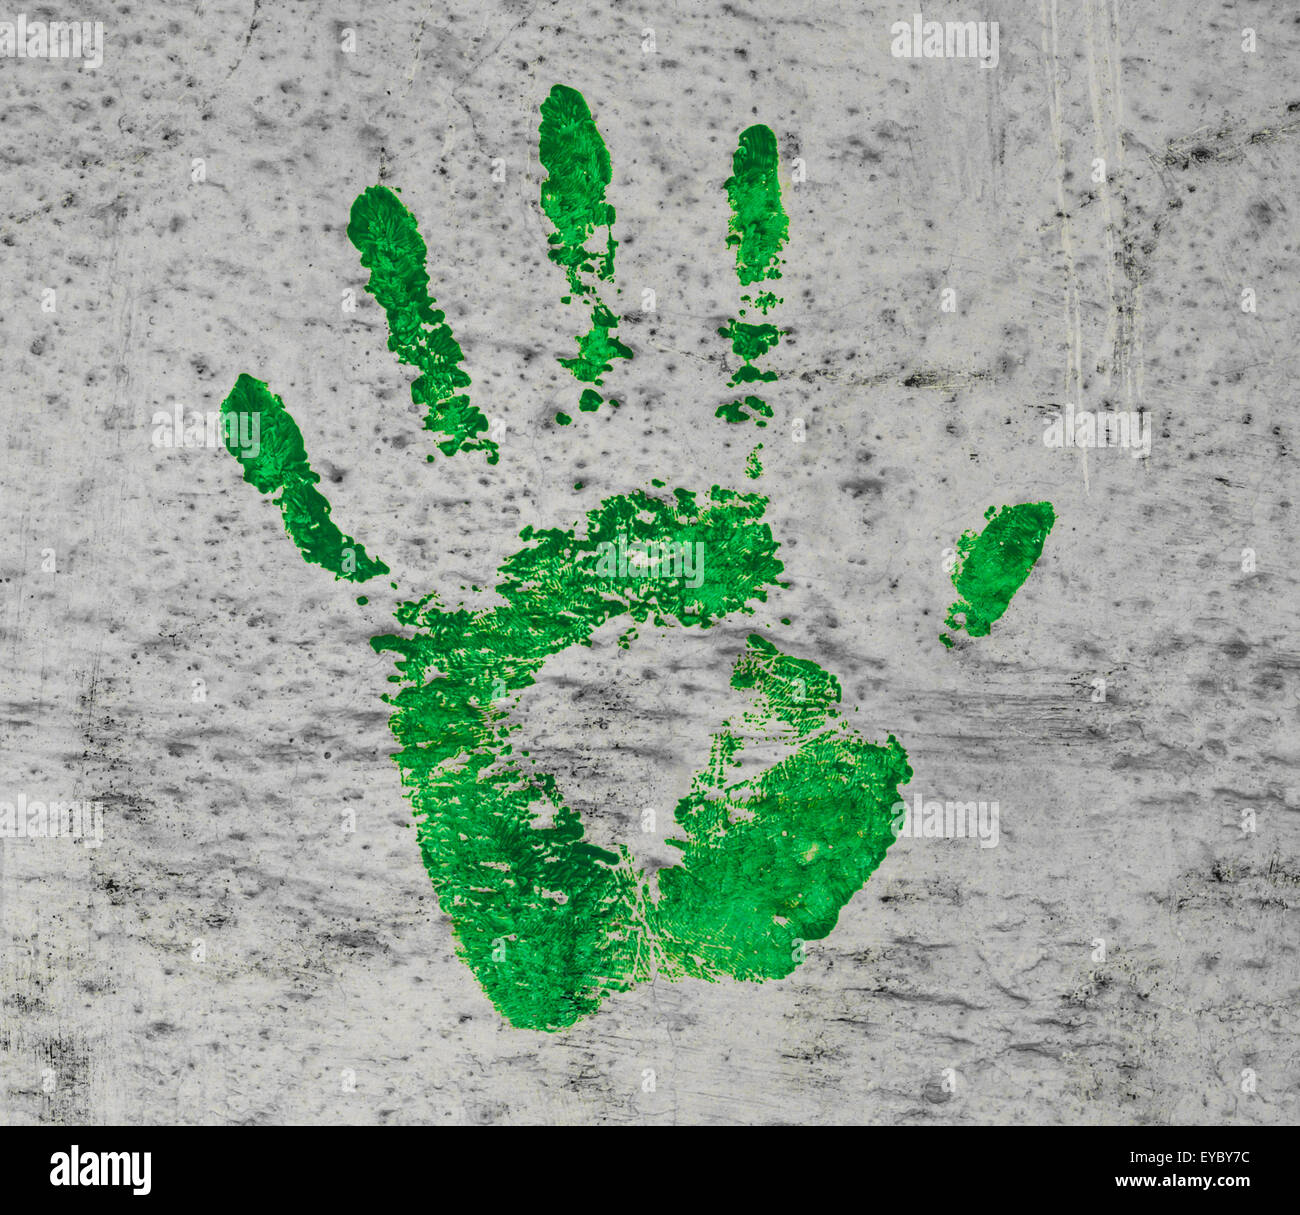 Green painted hand print on a grunge wall Stock Photo